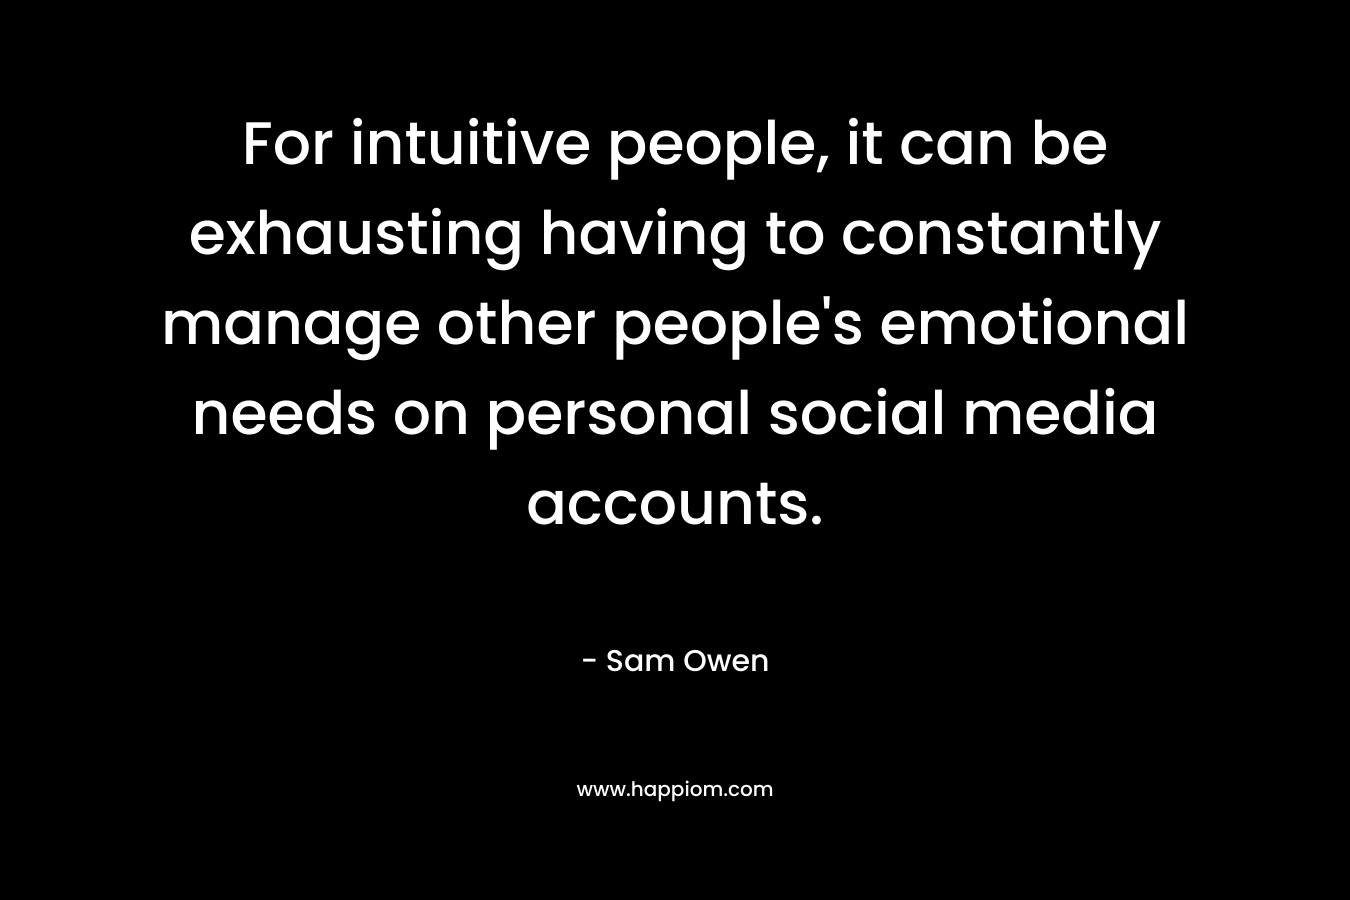 For intuitive people, it can be exhausting having to constantly manage other people’s emotional needs on personal social media accounts. – Sam Owen